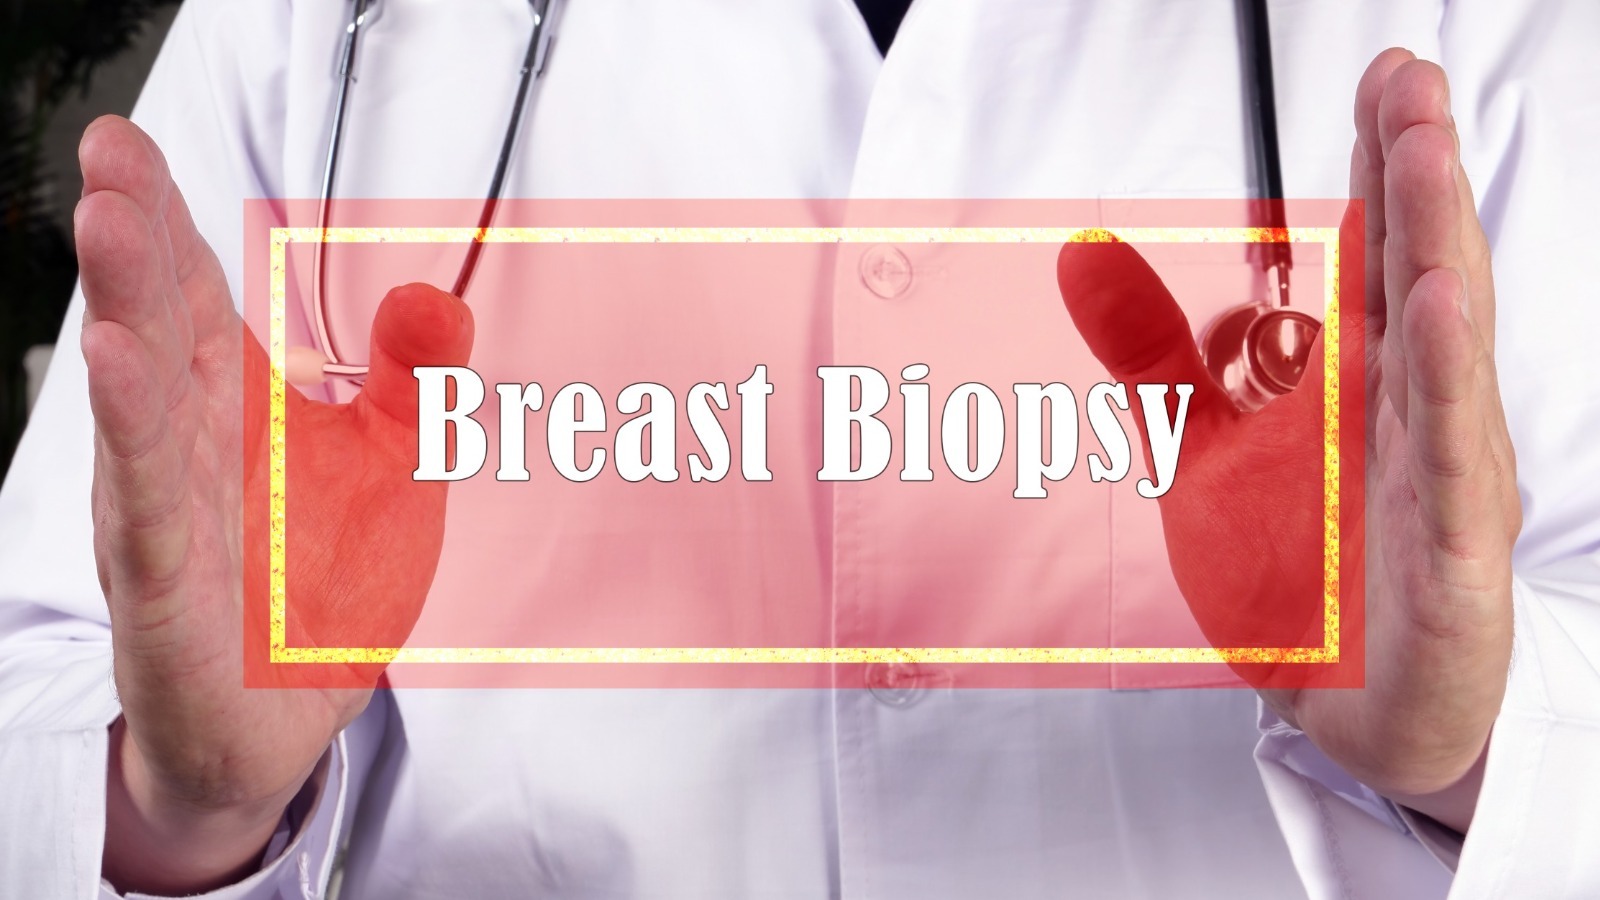 What To Expect When You Go For A Breast Biopsy